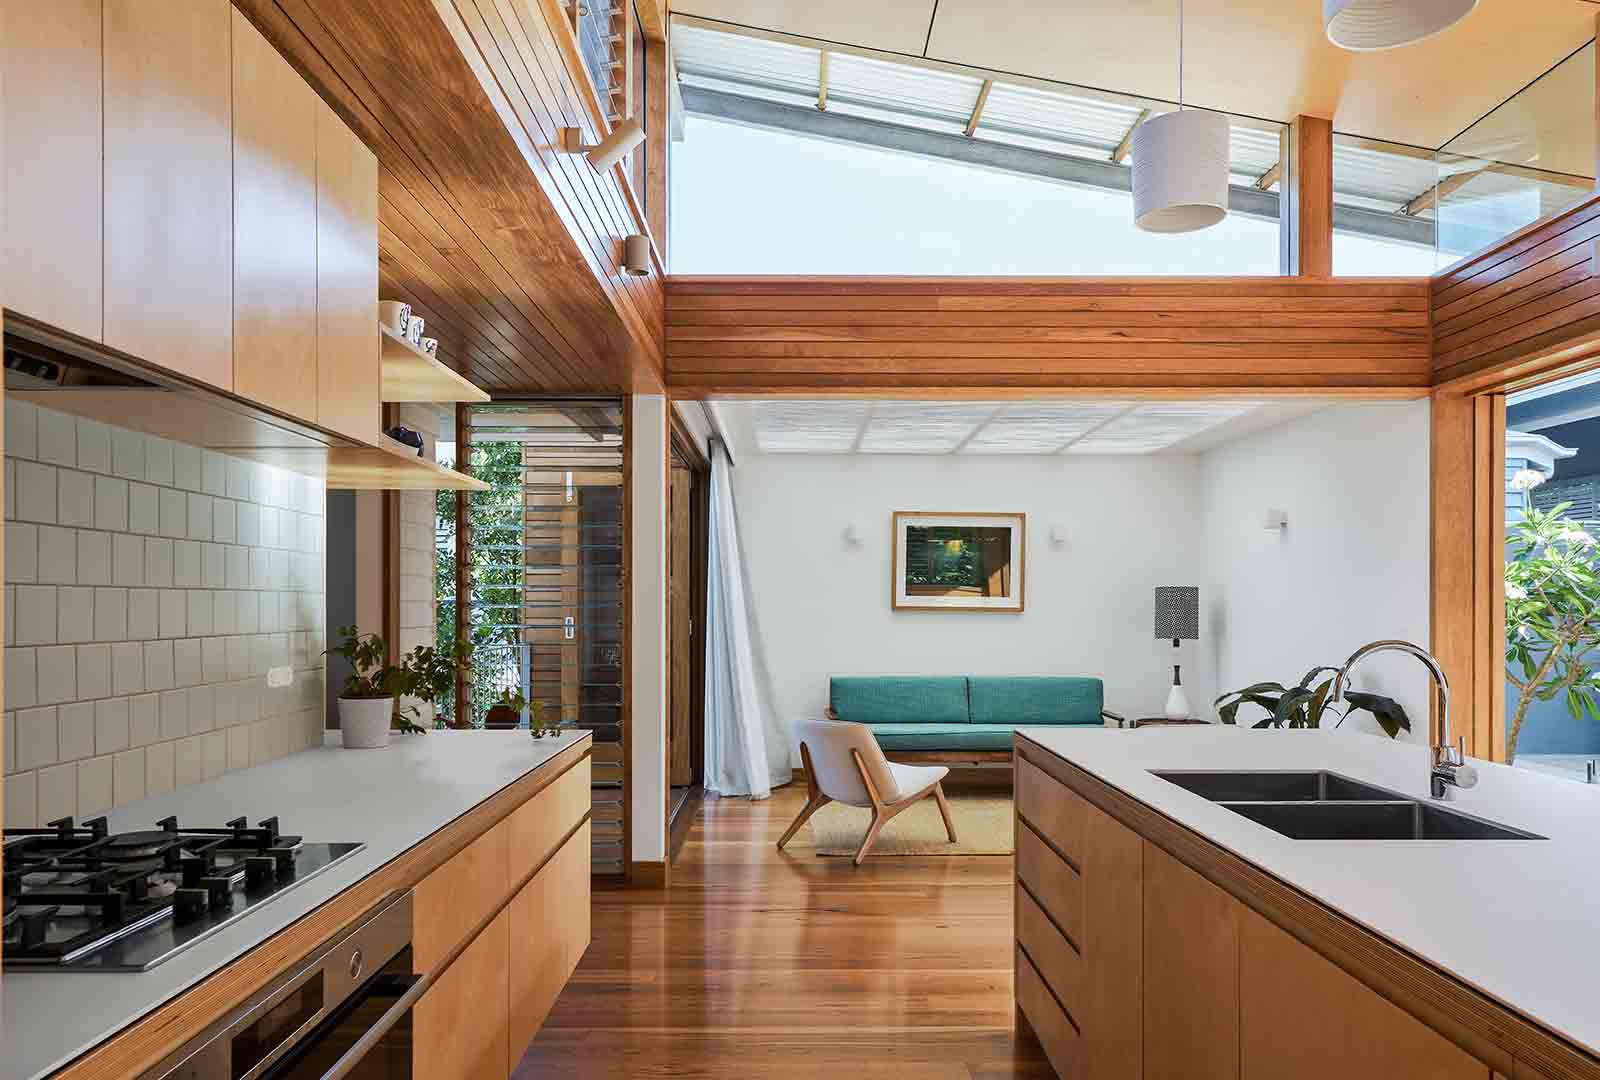 Kitchen and living of a custom home in Brisbane built by Bluebird